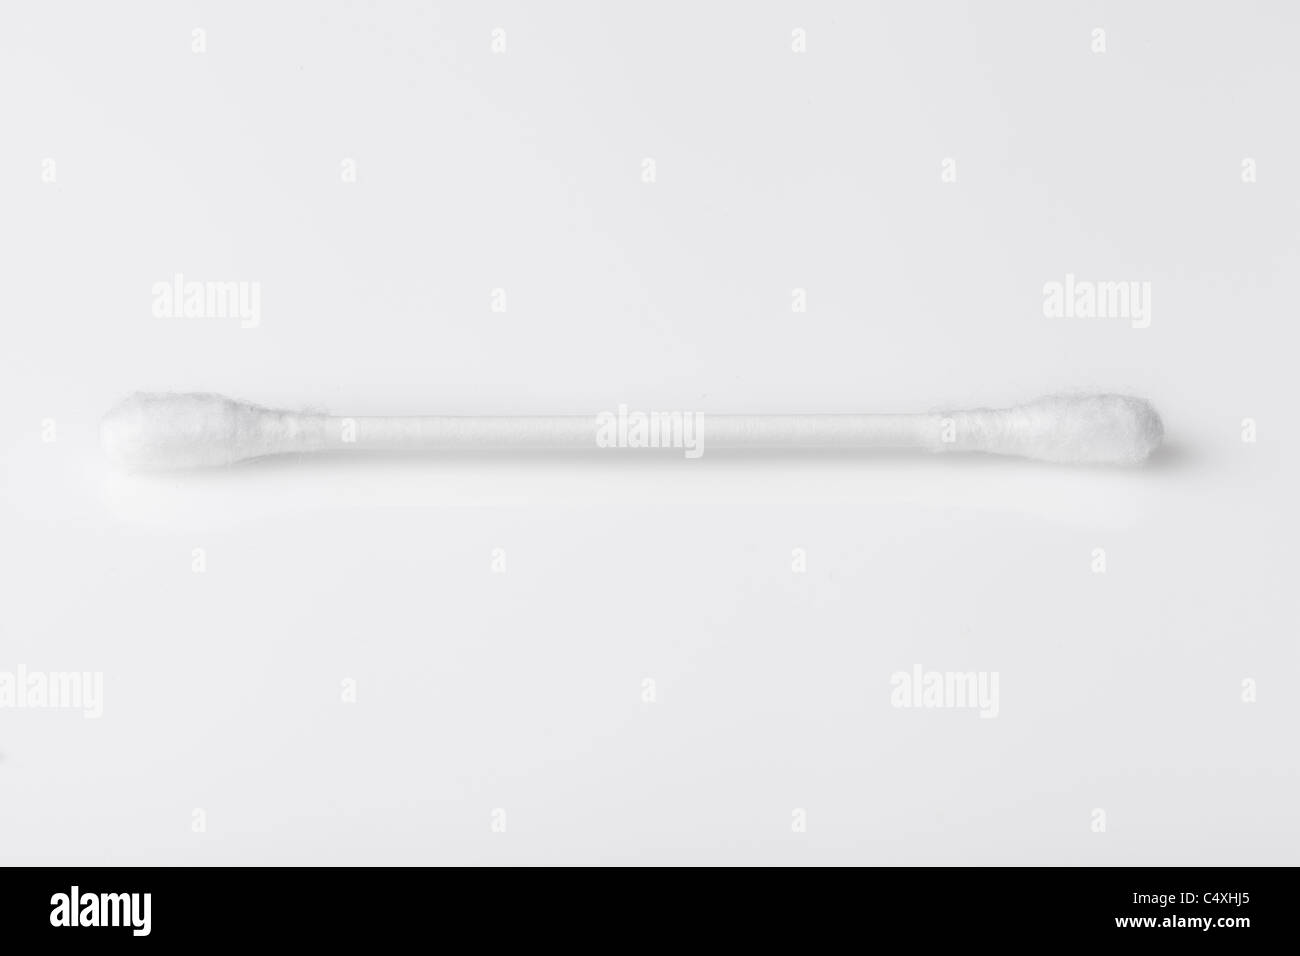 A cotton swab against a white background Stock Photo